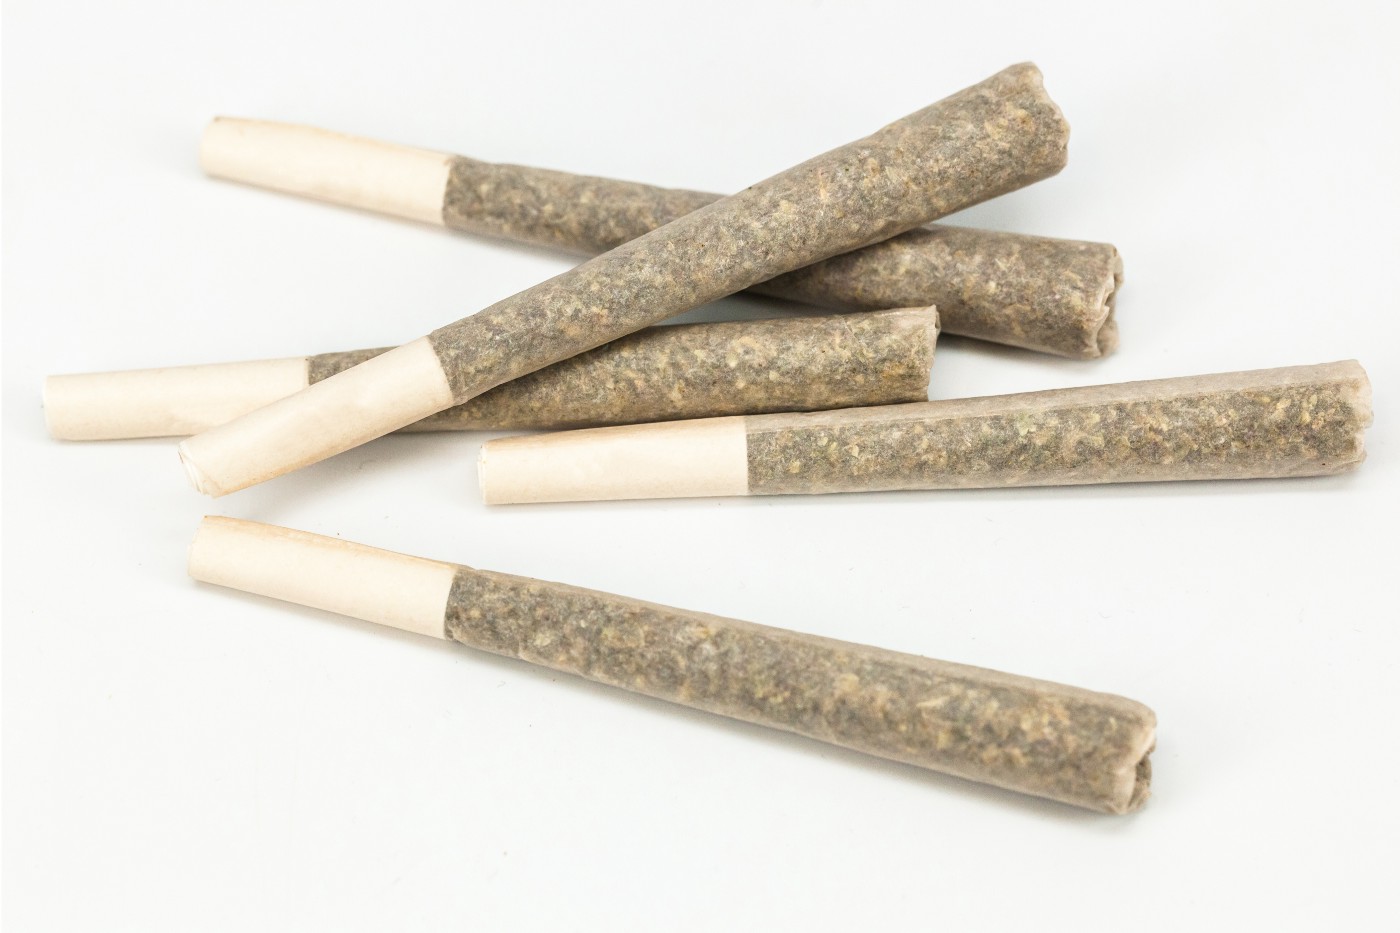 Why are hemp pre-rolls getting famous?